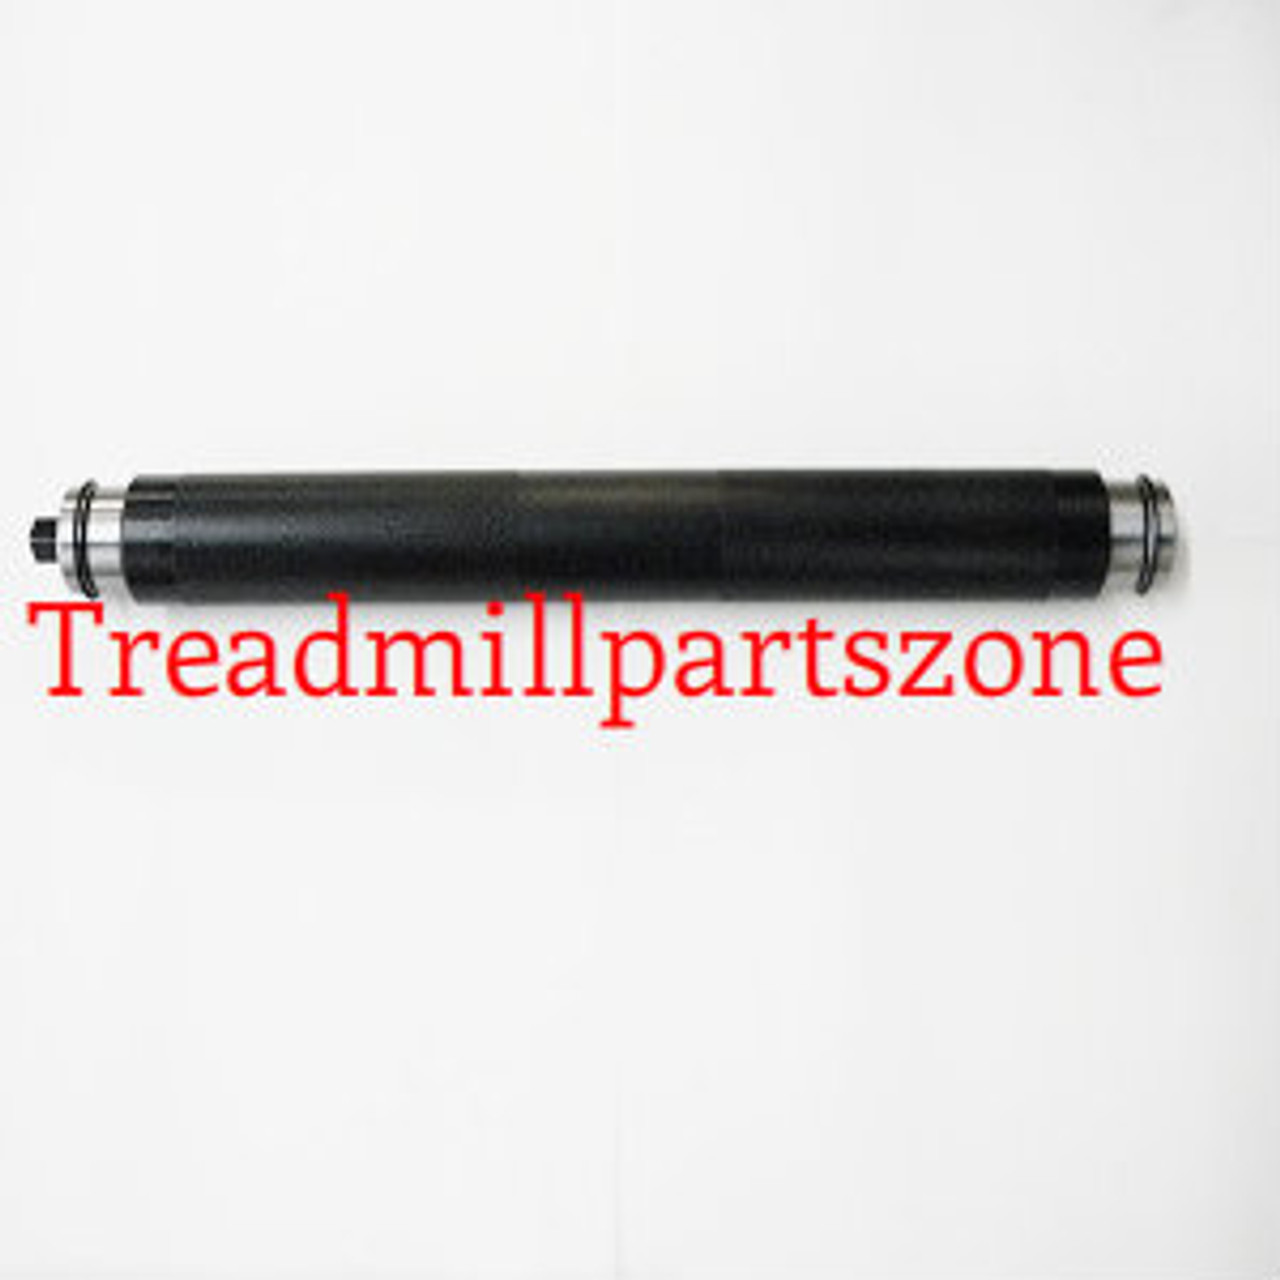 Nautilus Treadclimber Model Mobia Rear Roller Sub Assembly Part 003-5208